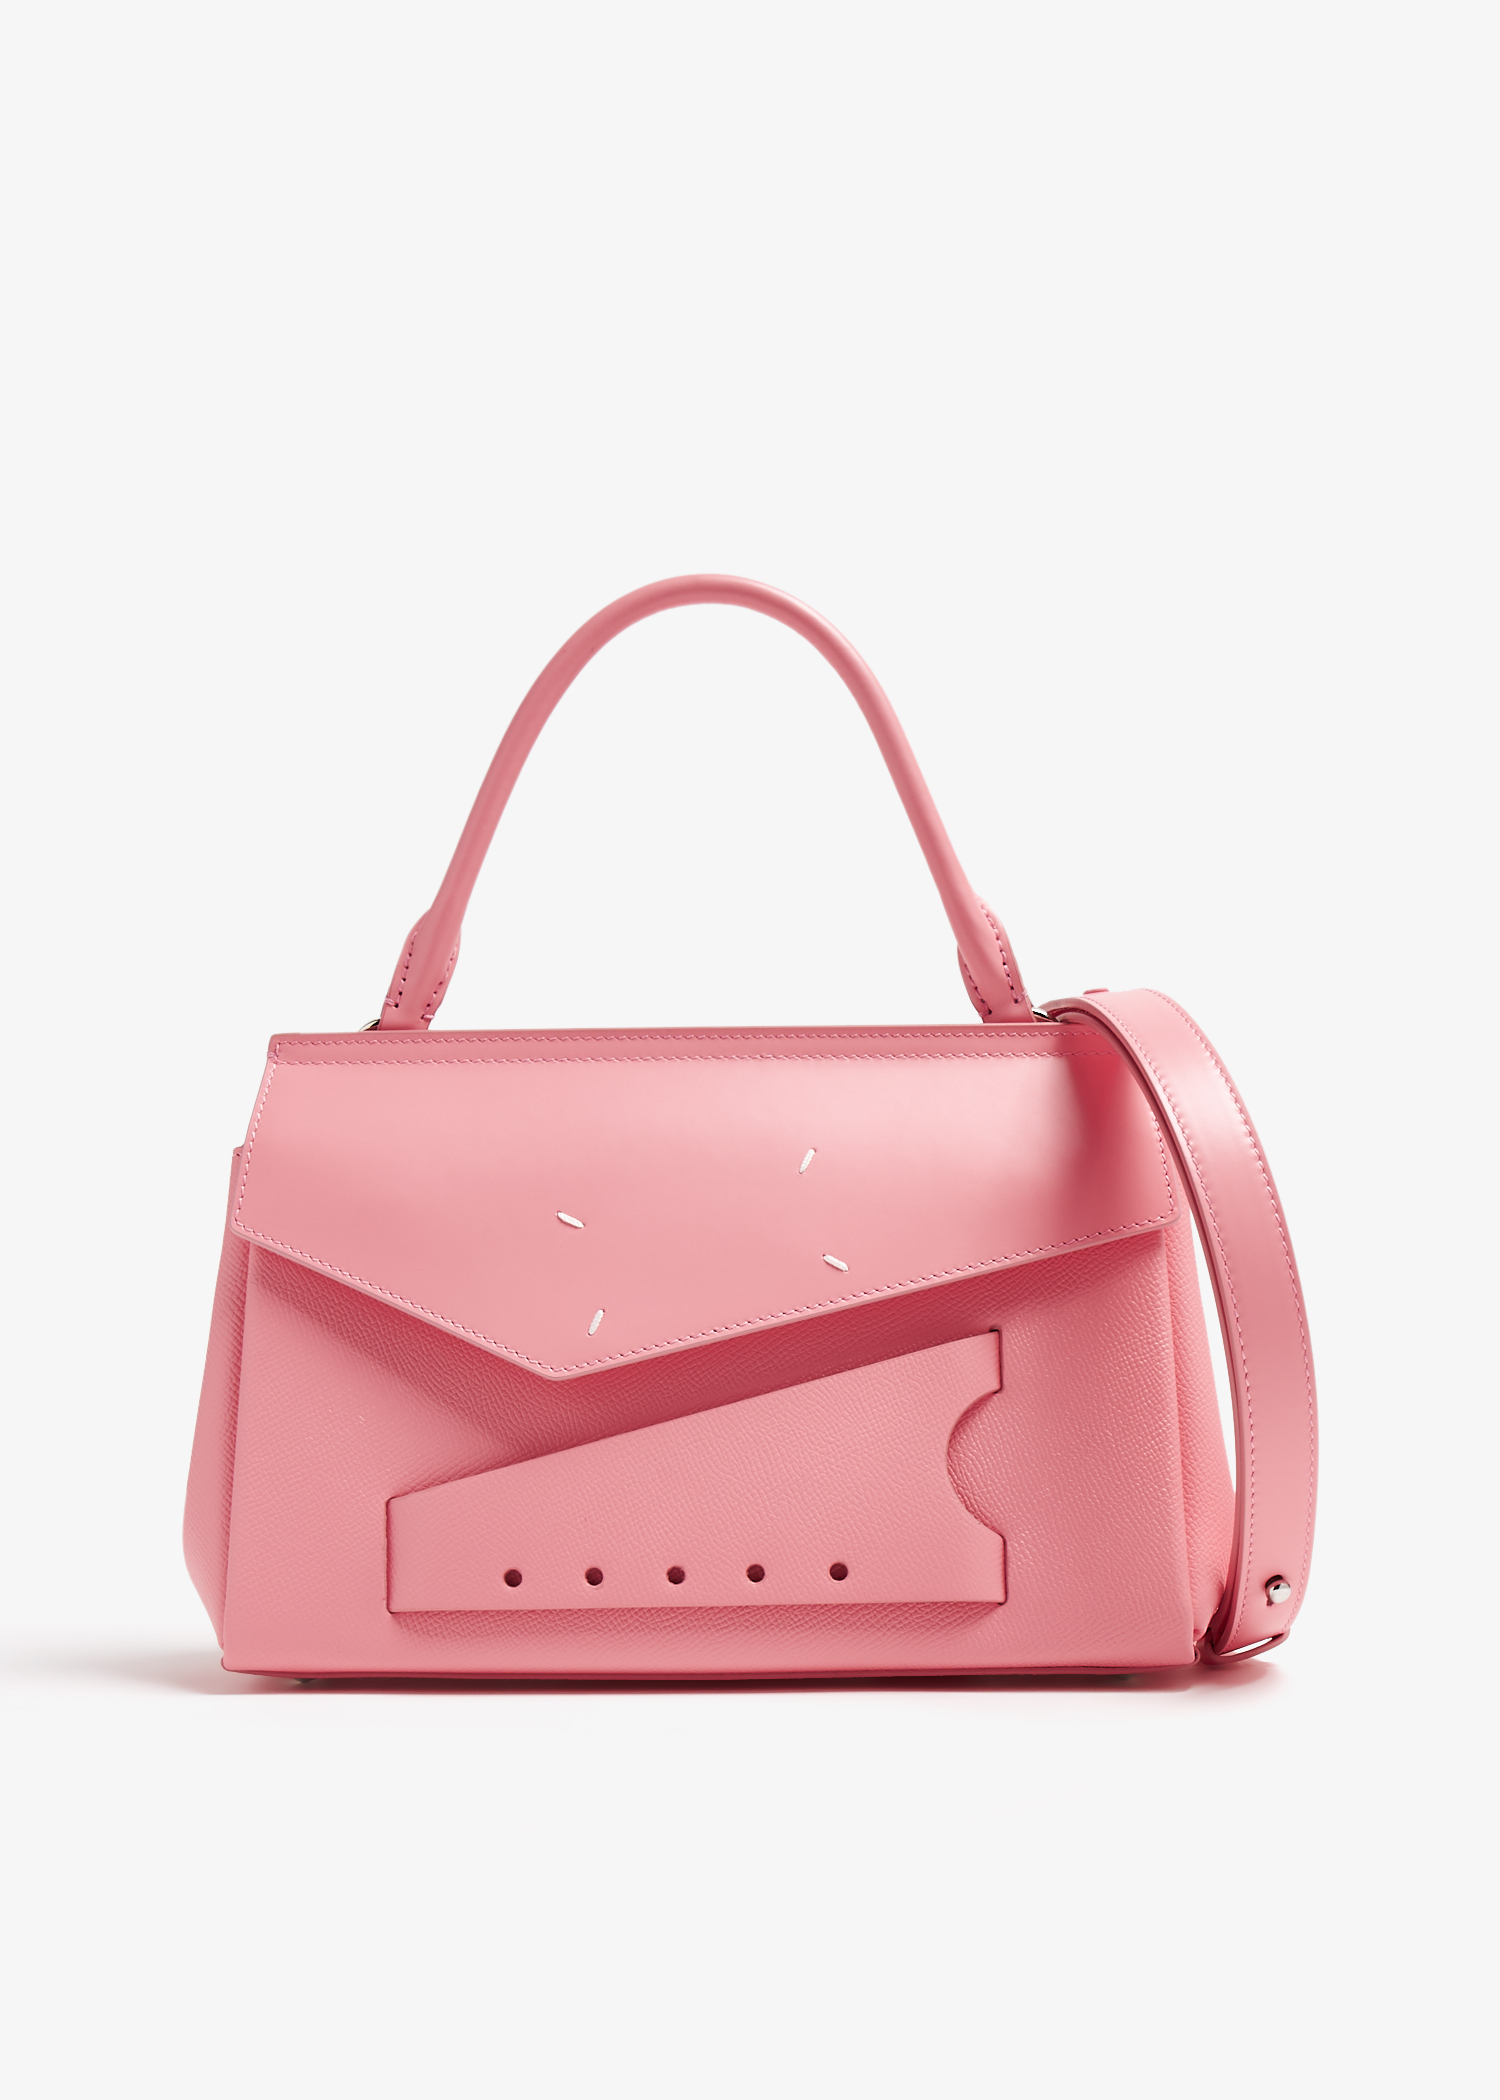 Maison Margiela Snatched small top handle bag for Women - Pink in 